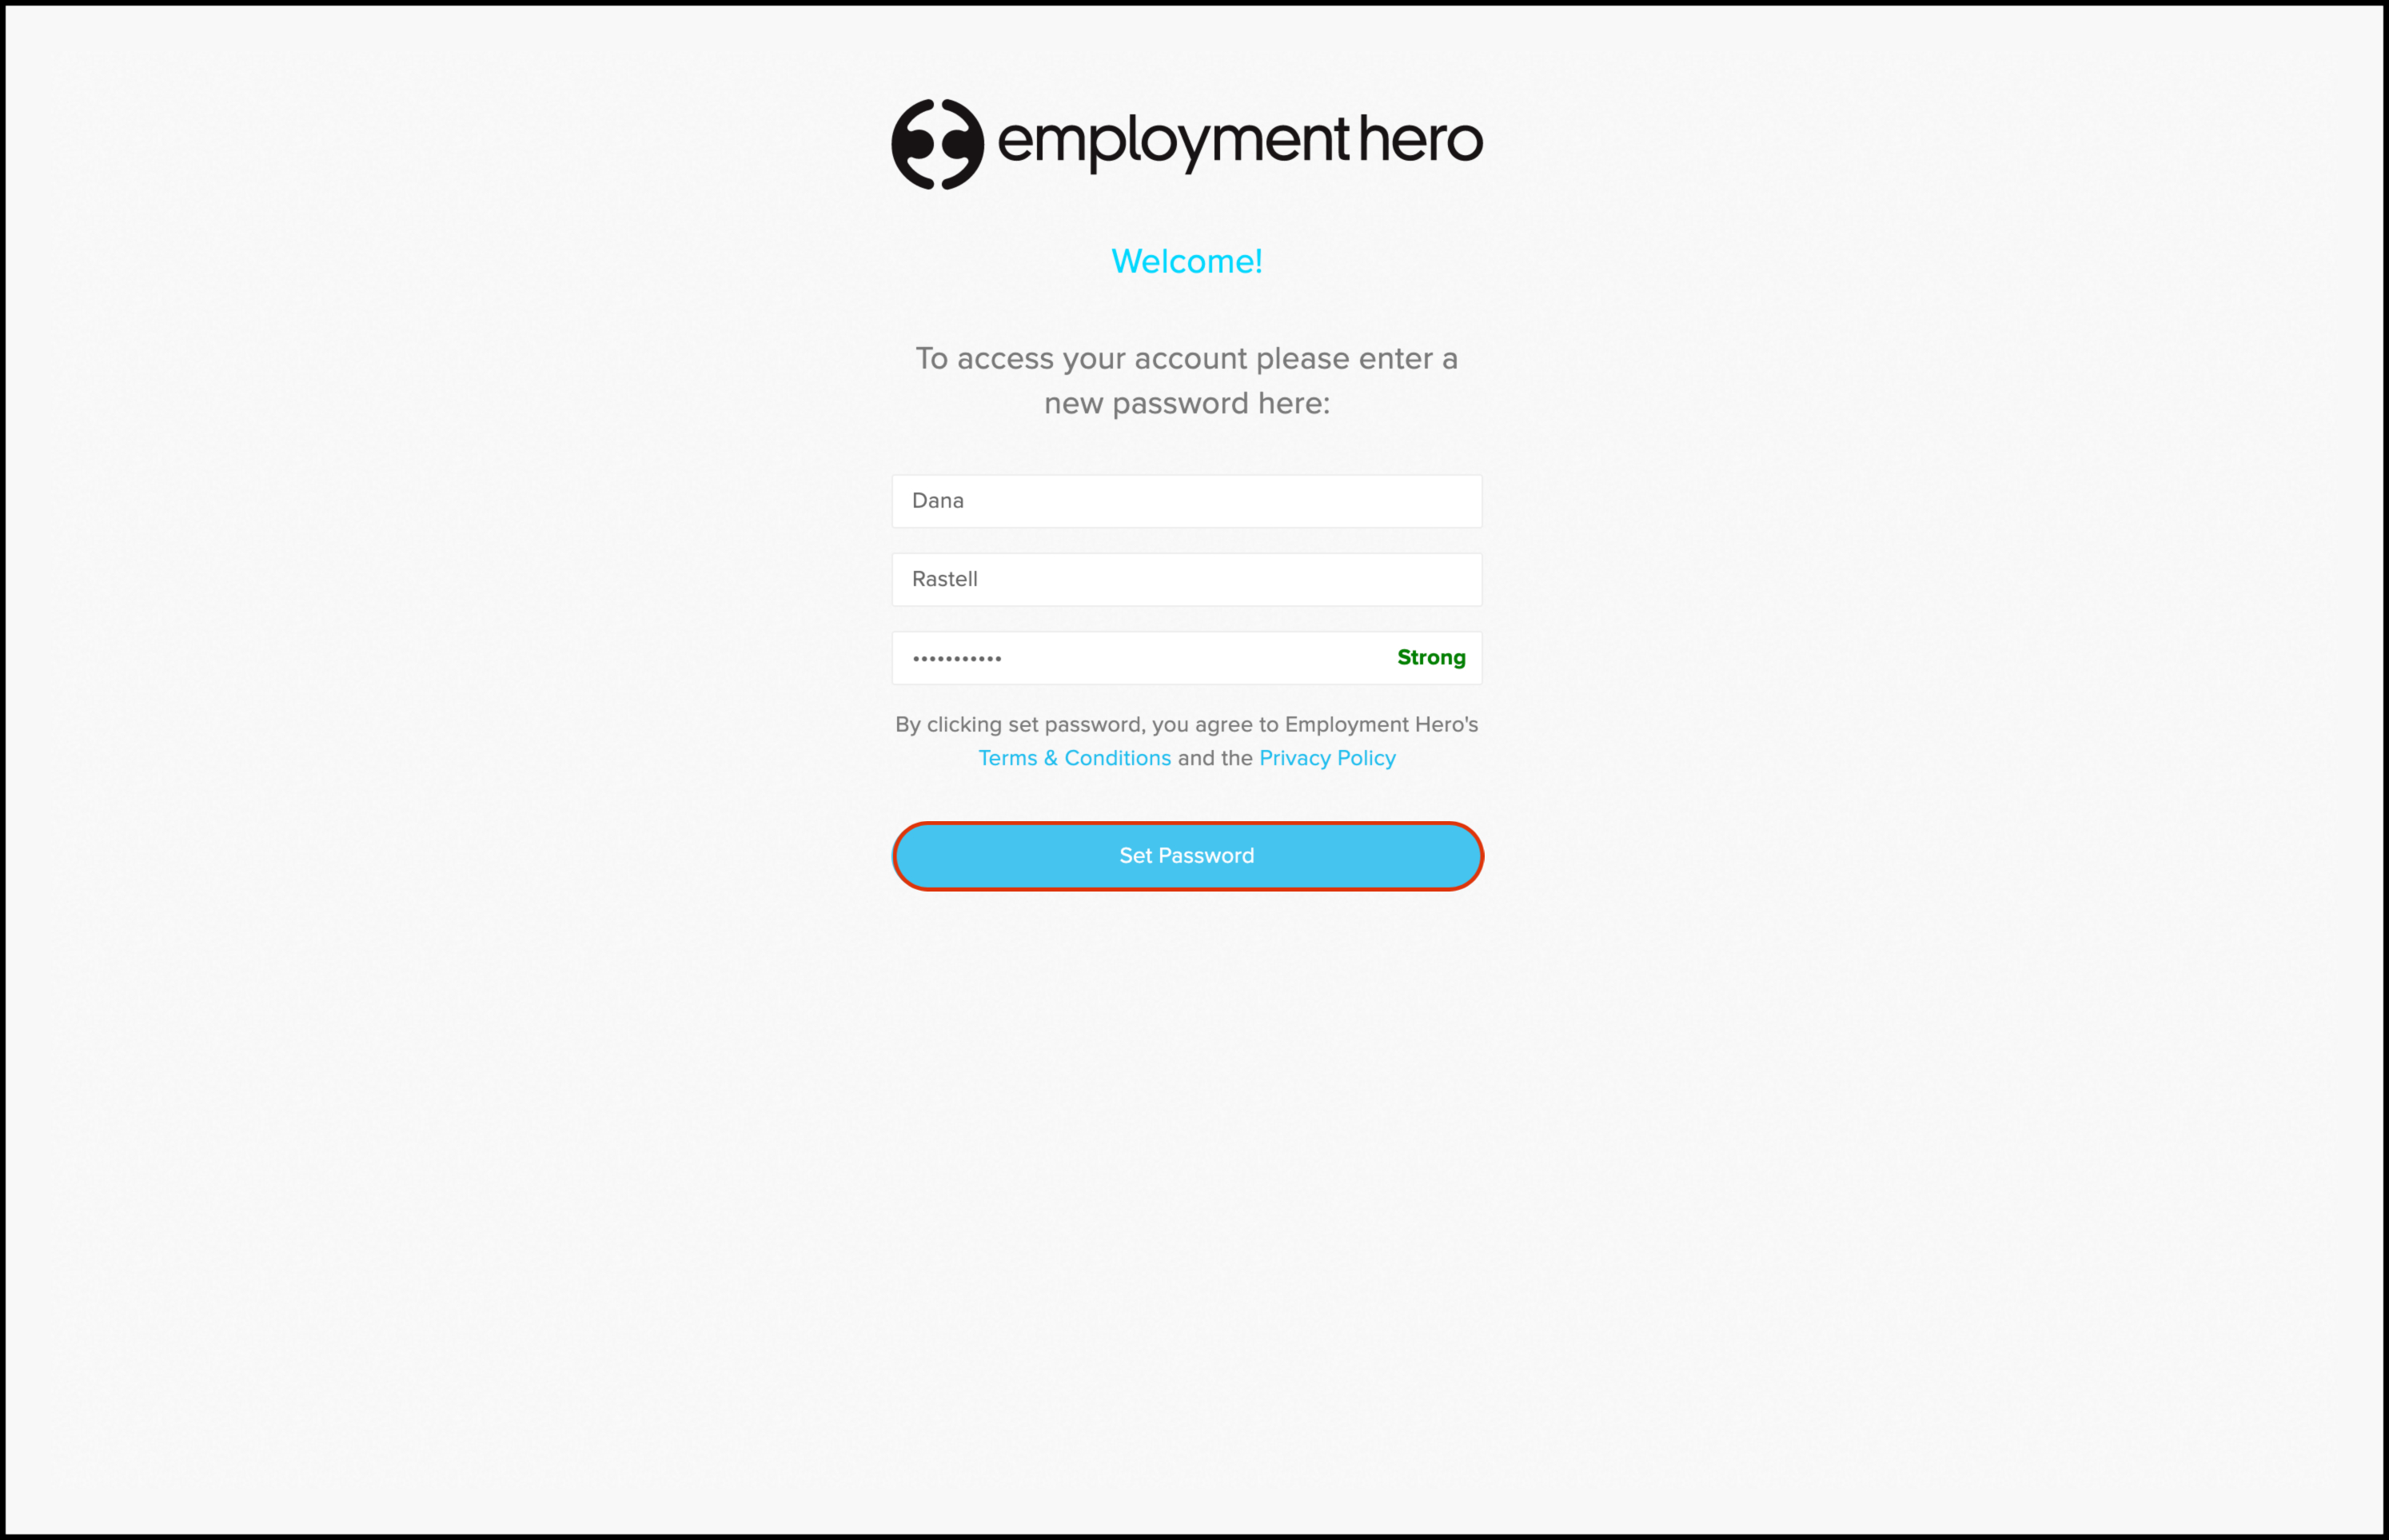 screenshot of where the link from that email takes you to and where you can set your password on the employment hero portal